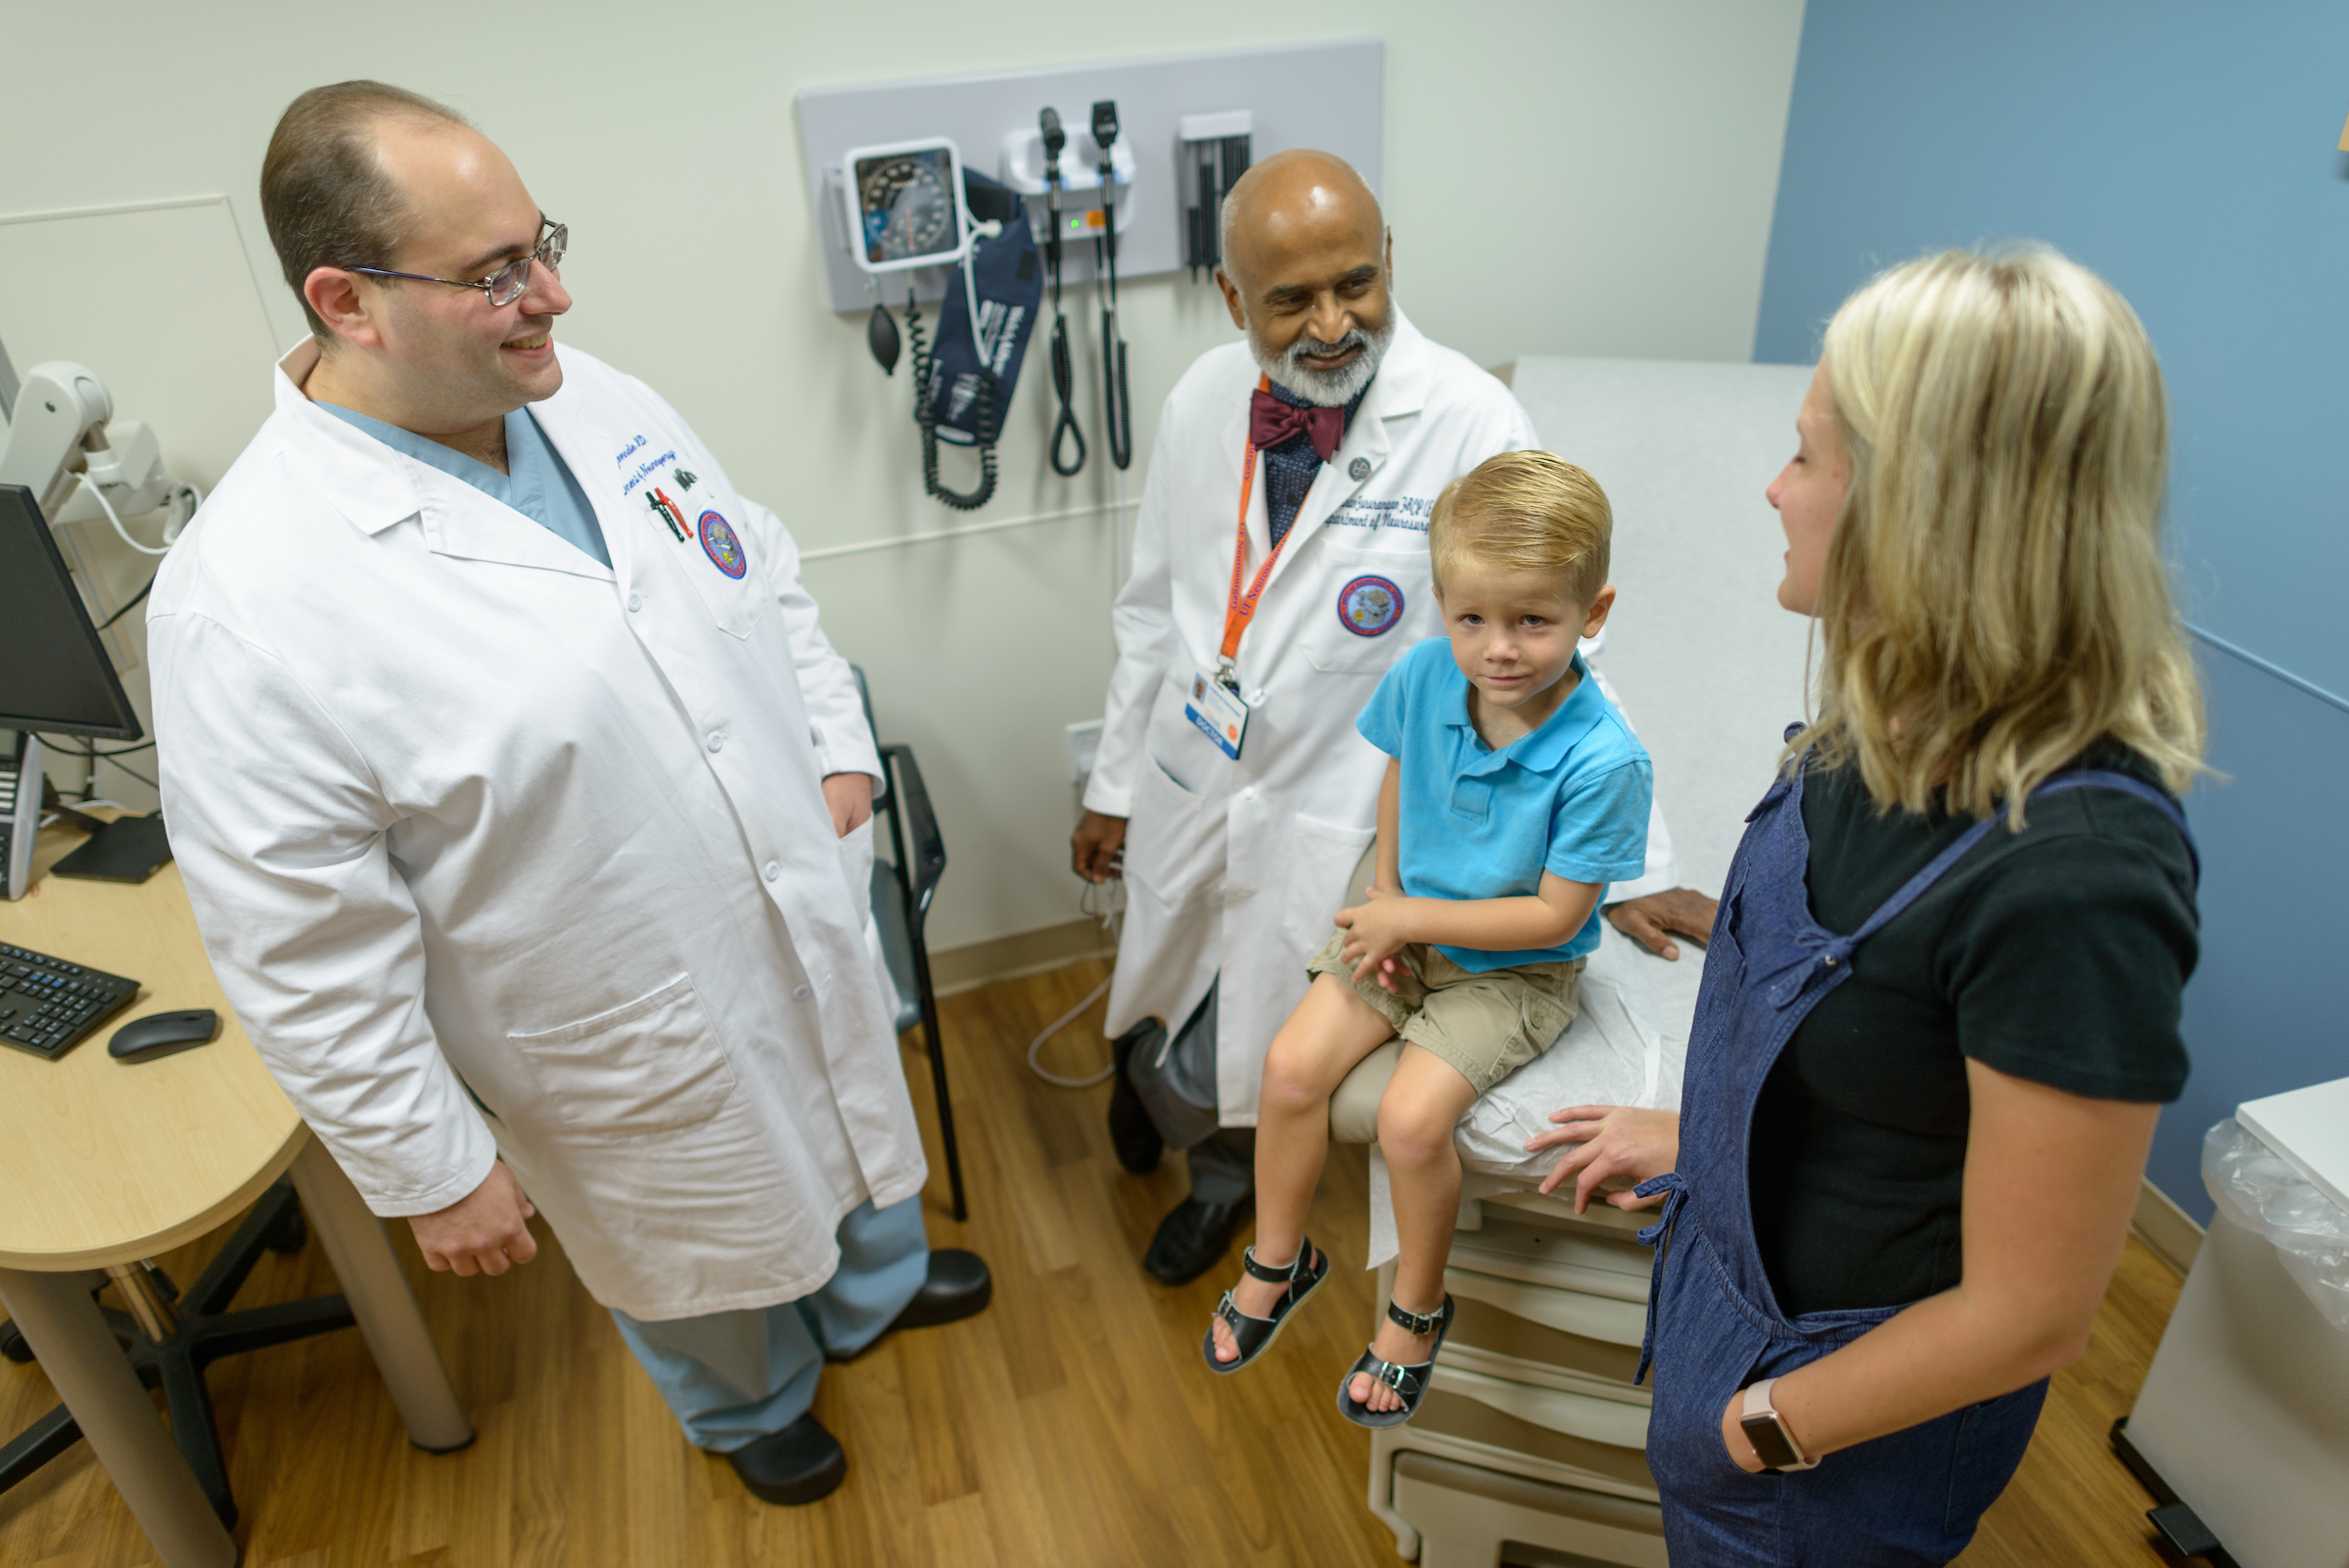 Two UF Health pediatric neurosurgeons speak with the mother of a young male patient as he sits on an examination chair.